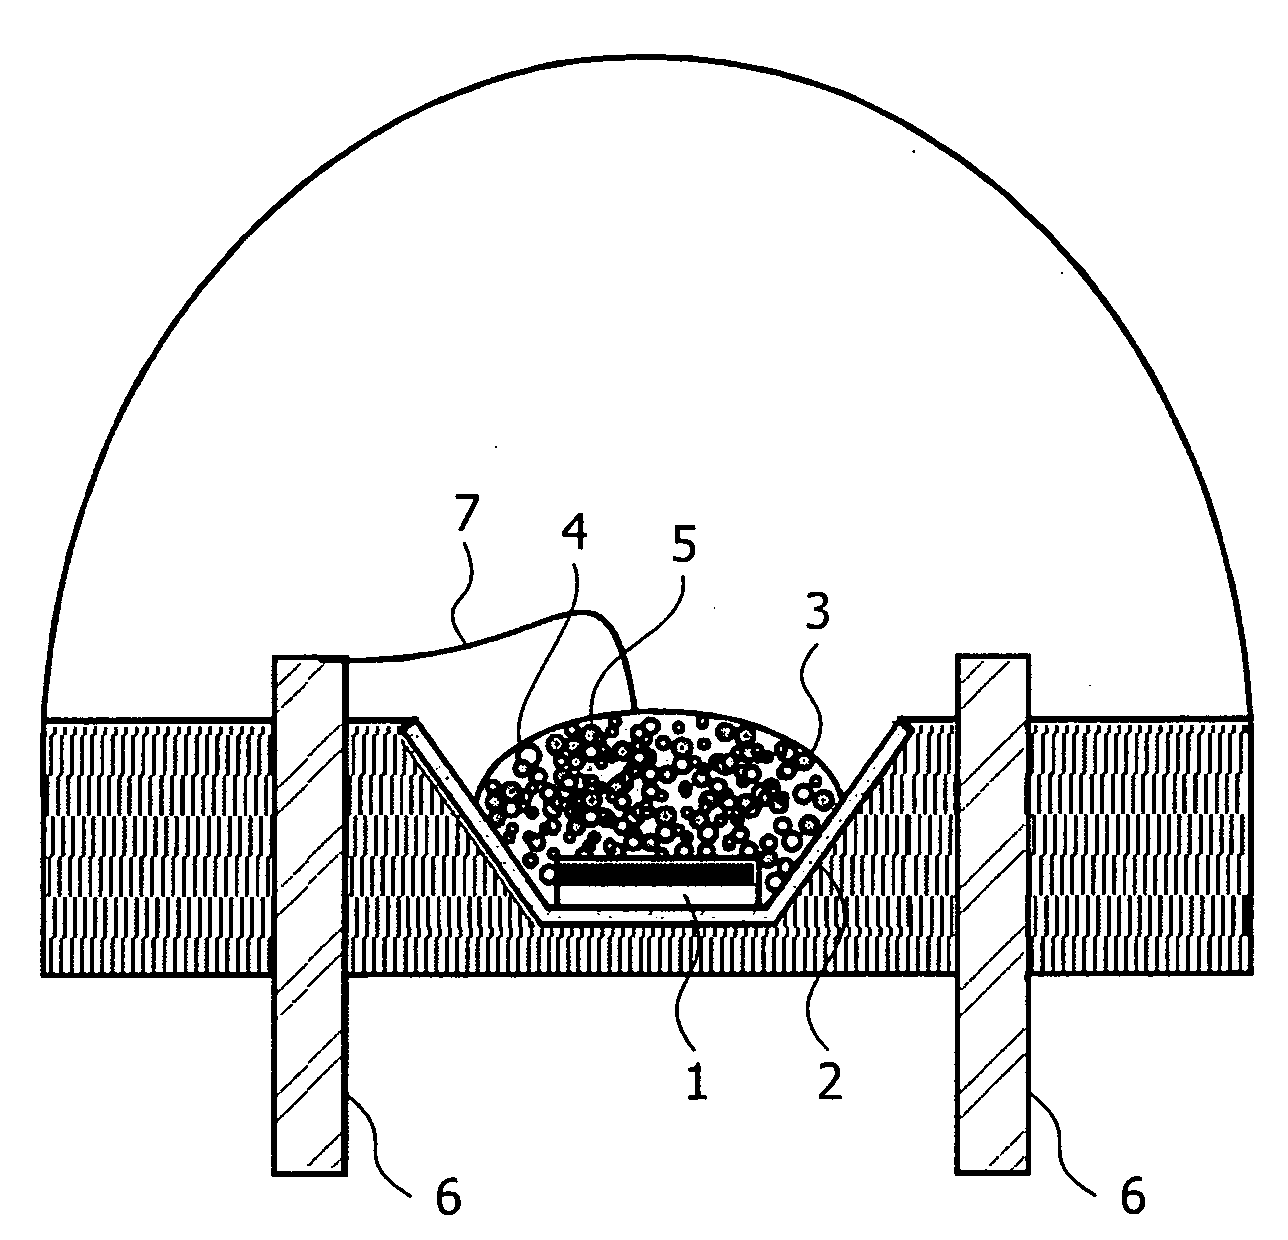 Illumination system comprising a radiation source and a fluorescent material